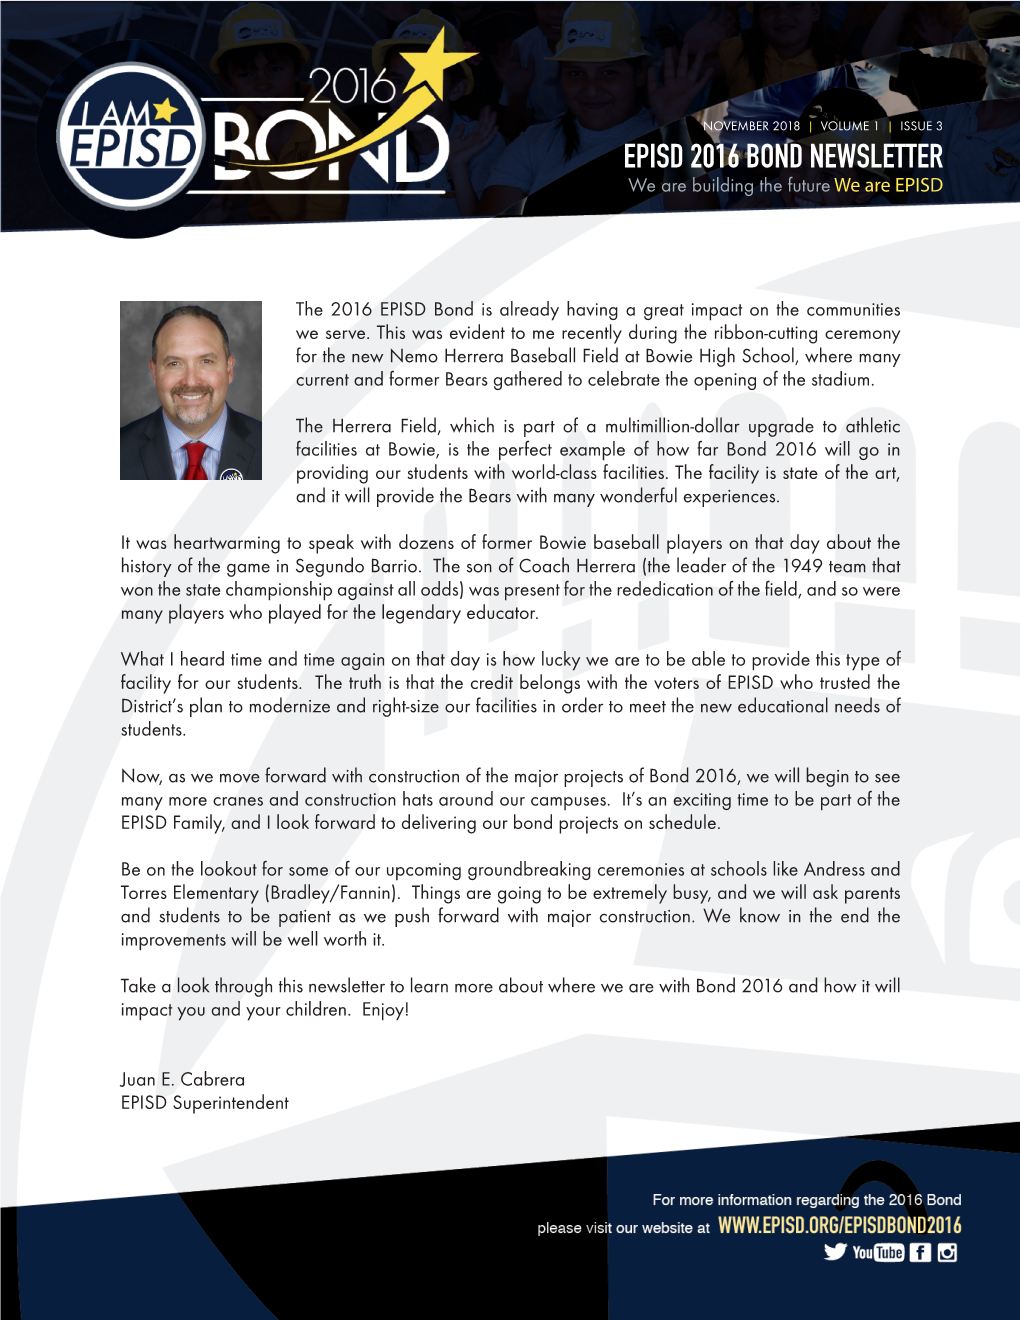 EPISD 2016 BOND NEWSLETTER We Are Building the Future We Are EPISD